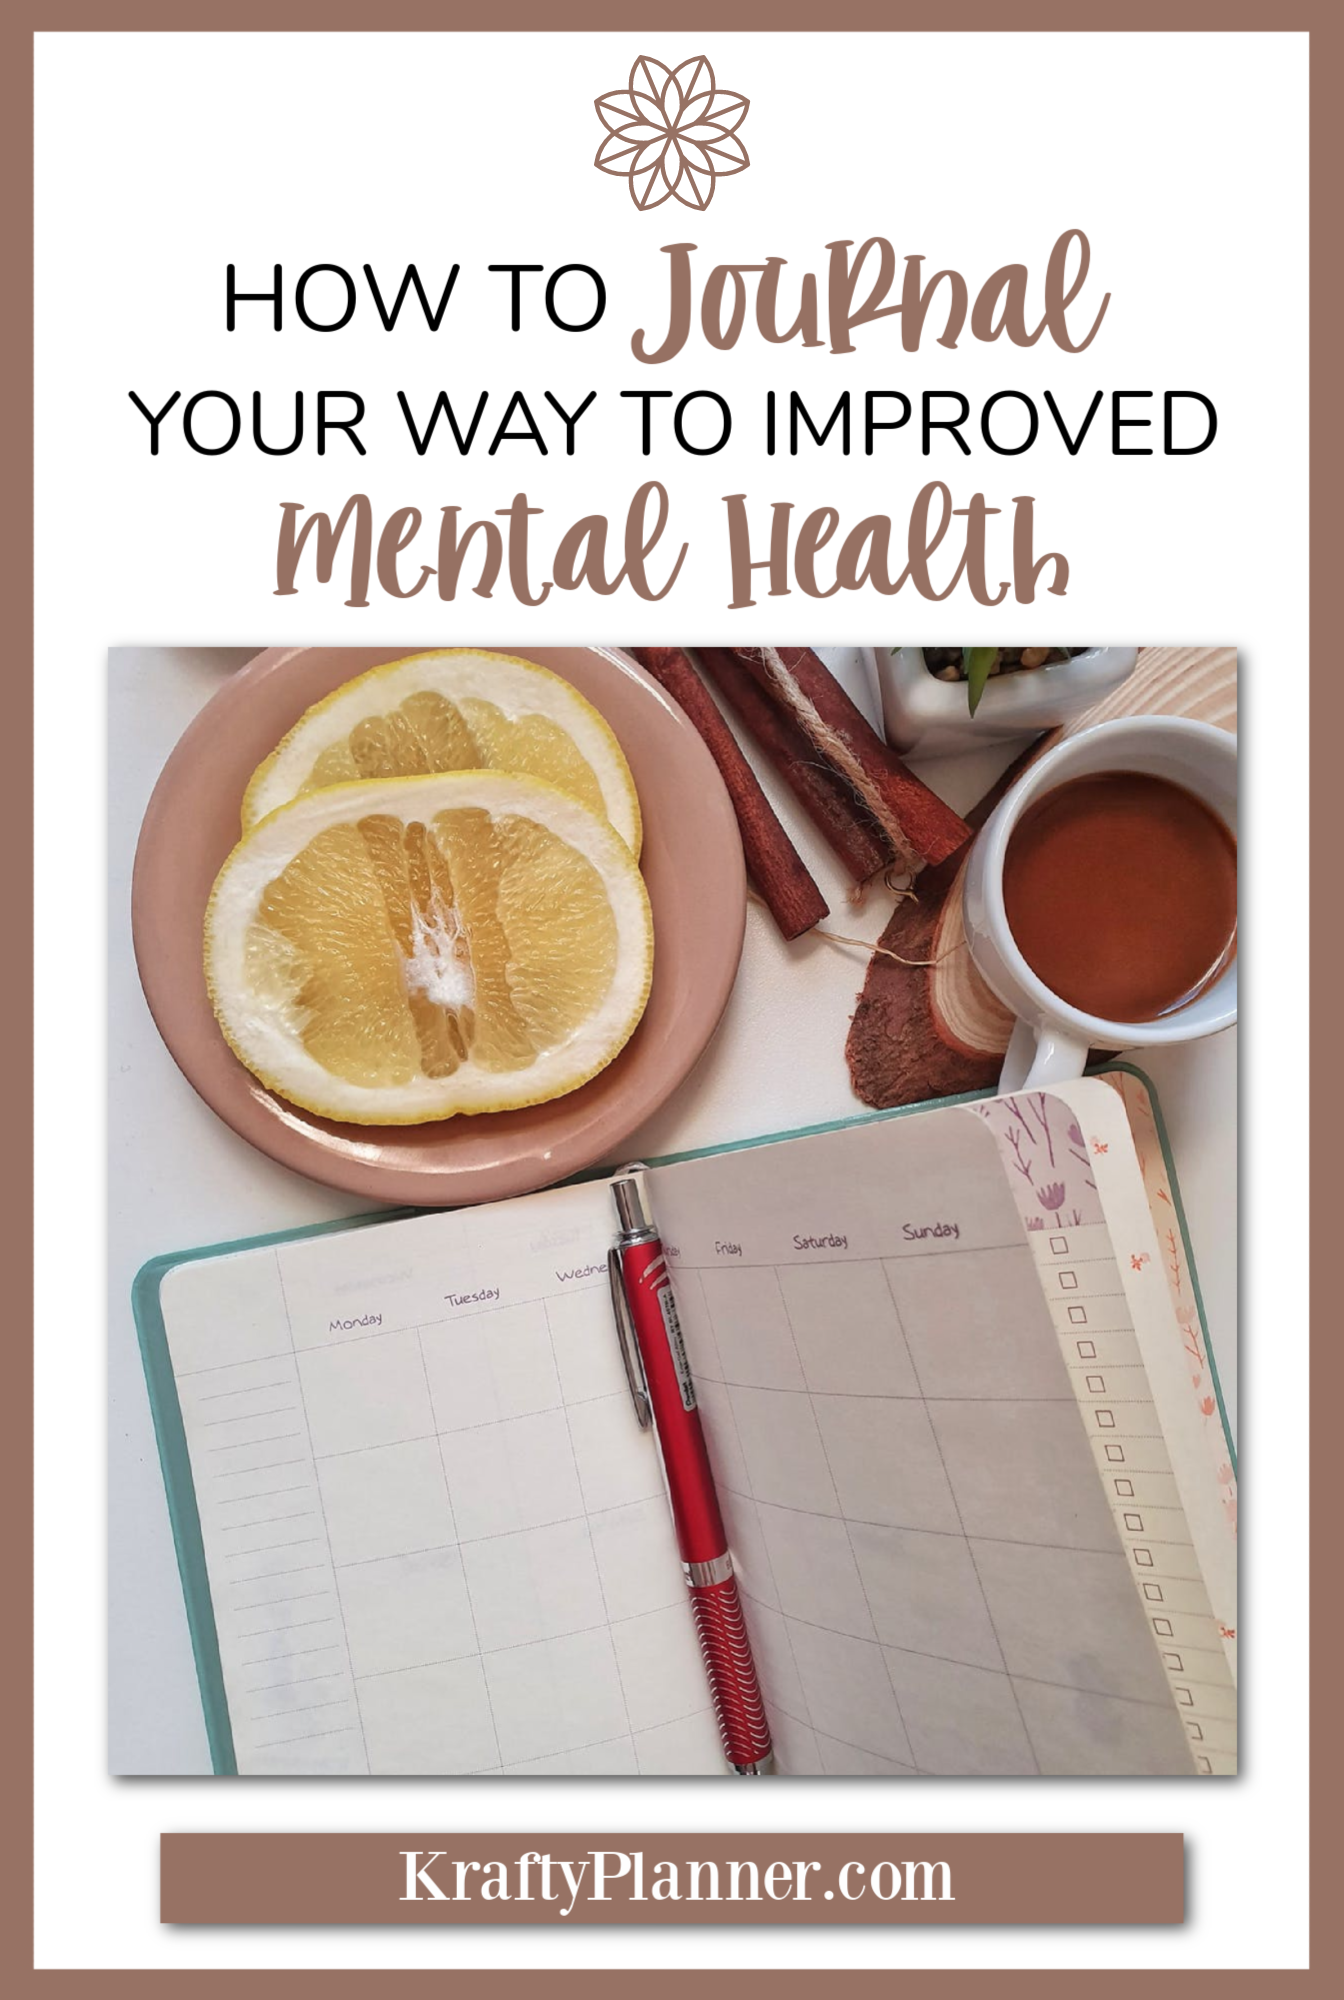 How to Journal Your Way to Improved Mental Health PIN 2.png